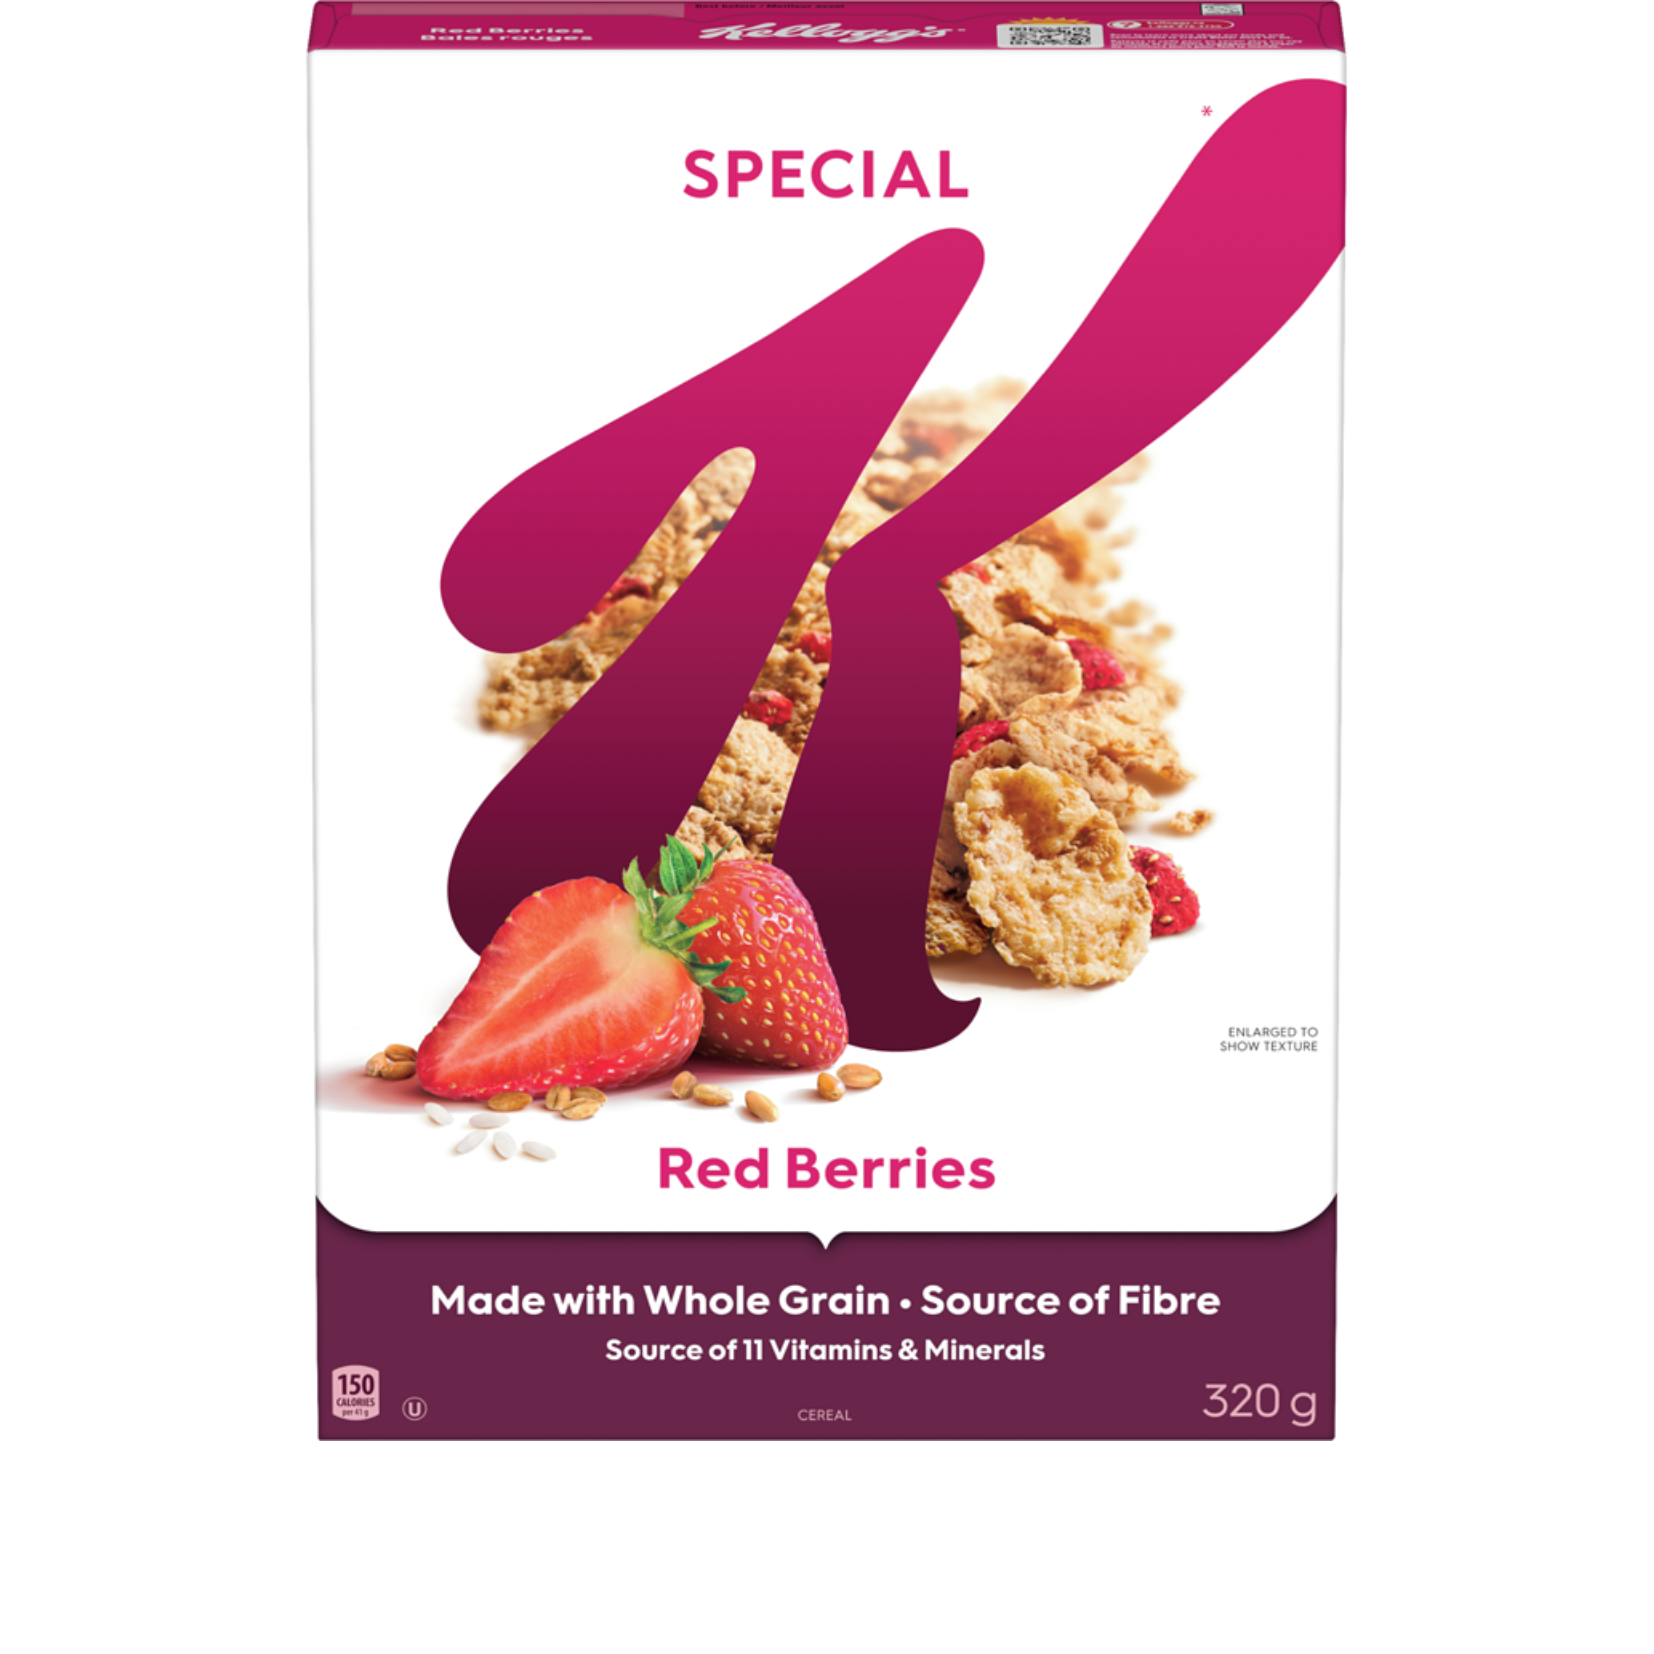 Kellogg's Special K Red Berries Cereal 320g